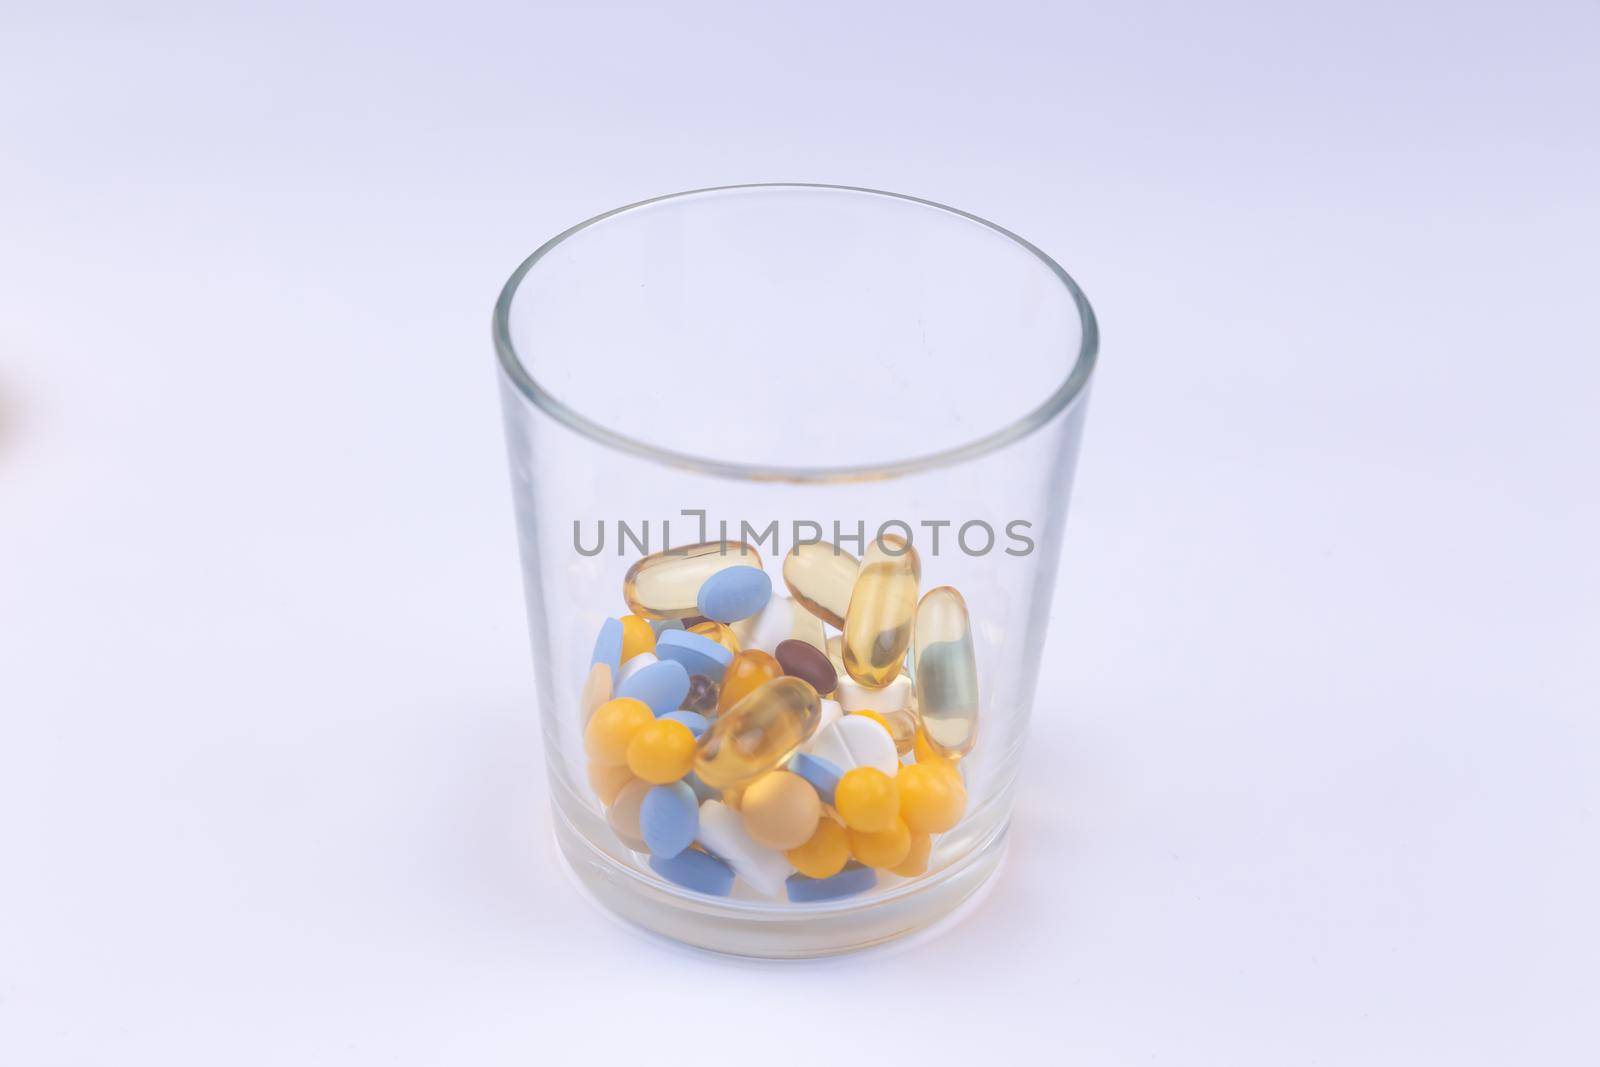 Dose of the colored pills in the glass of the package of pills. On white background with copy space for text.